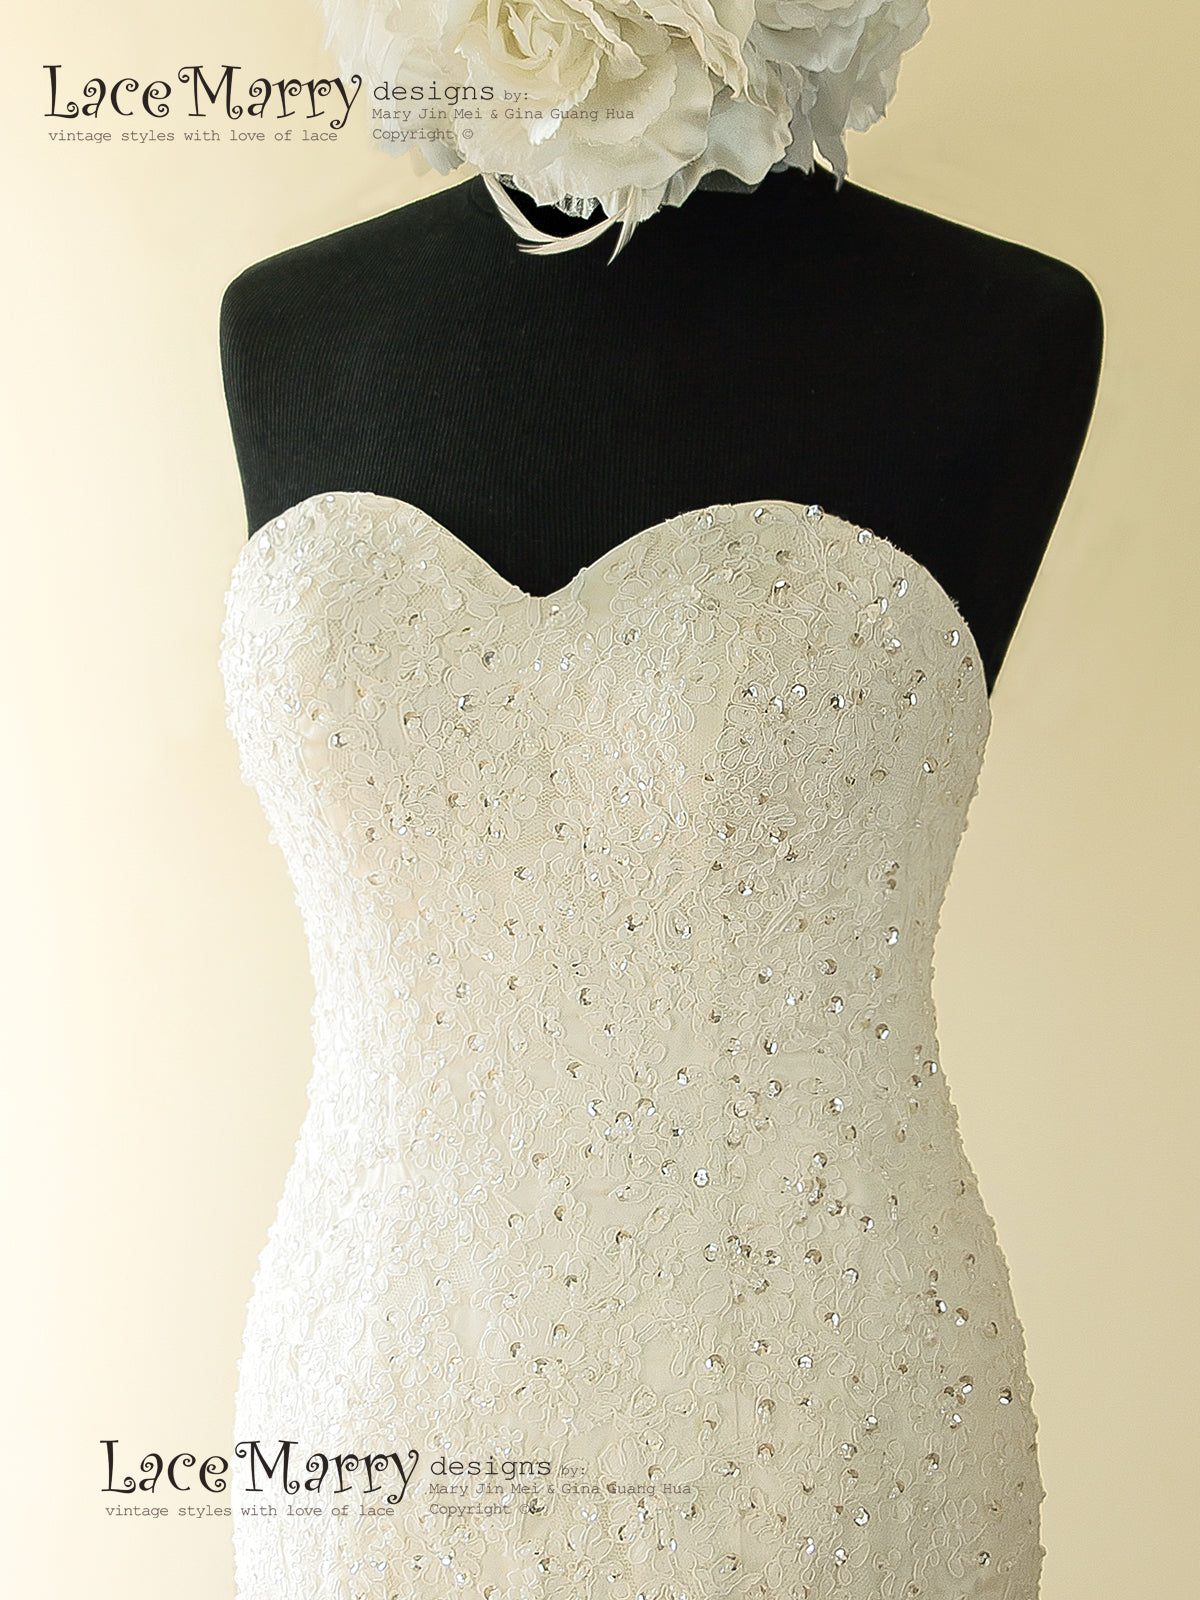 Lace Wedding Dress with Sweetheart Neckline